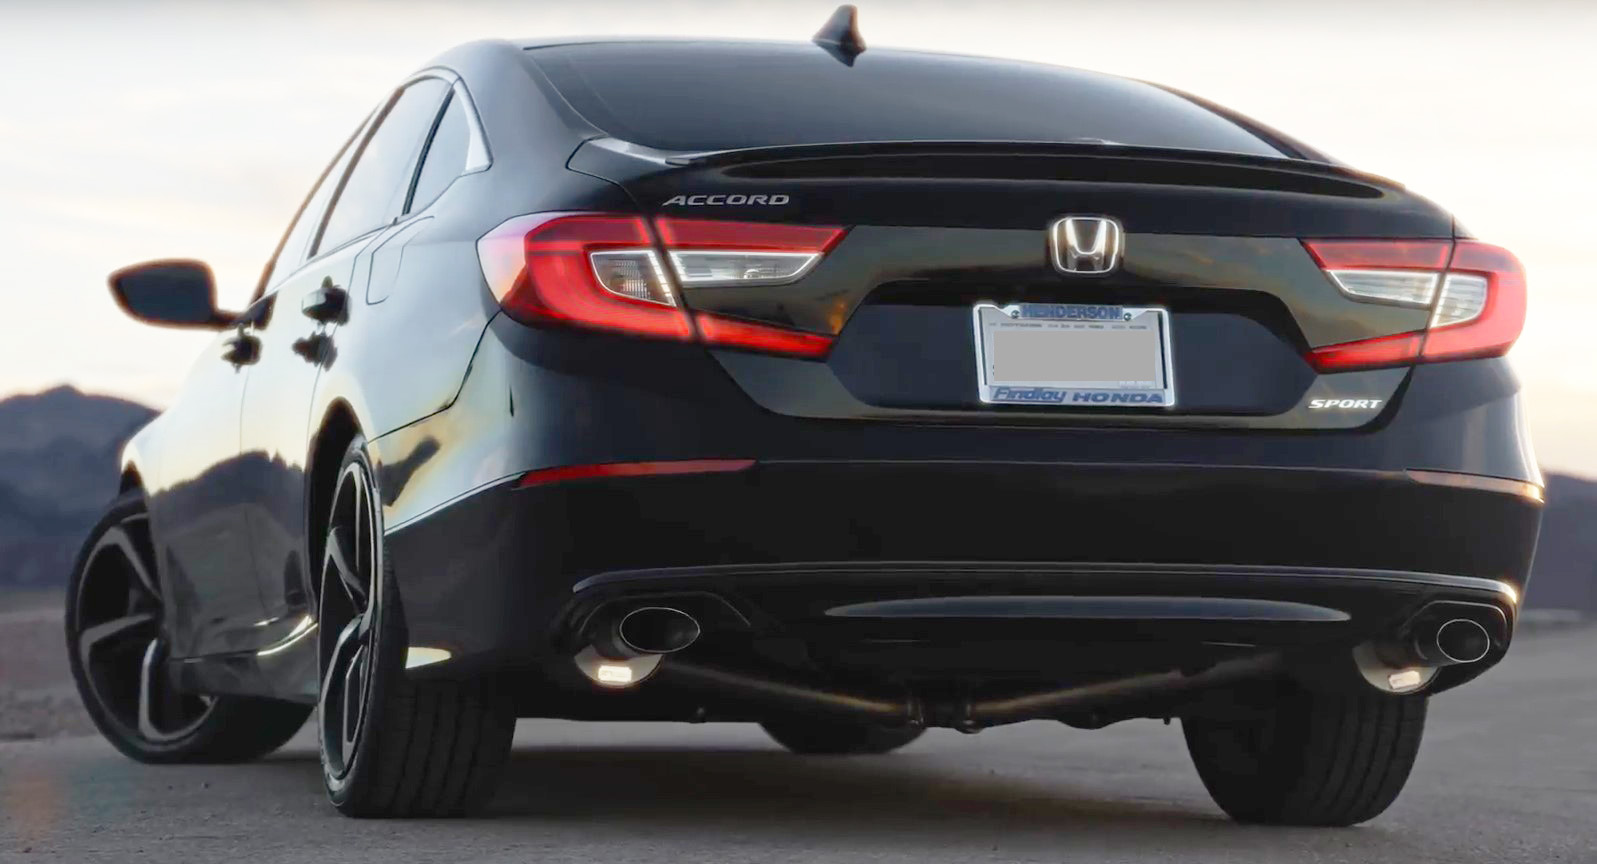 Check out the rear end looks of the Accord X now!